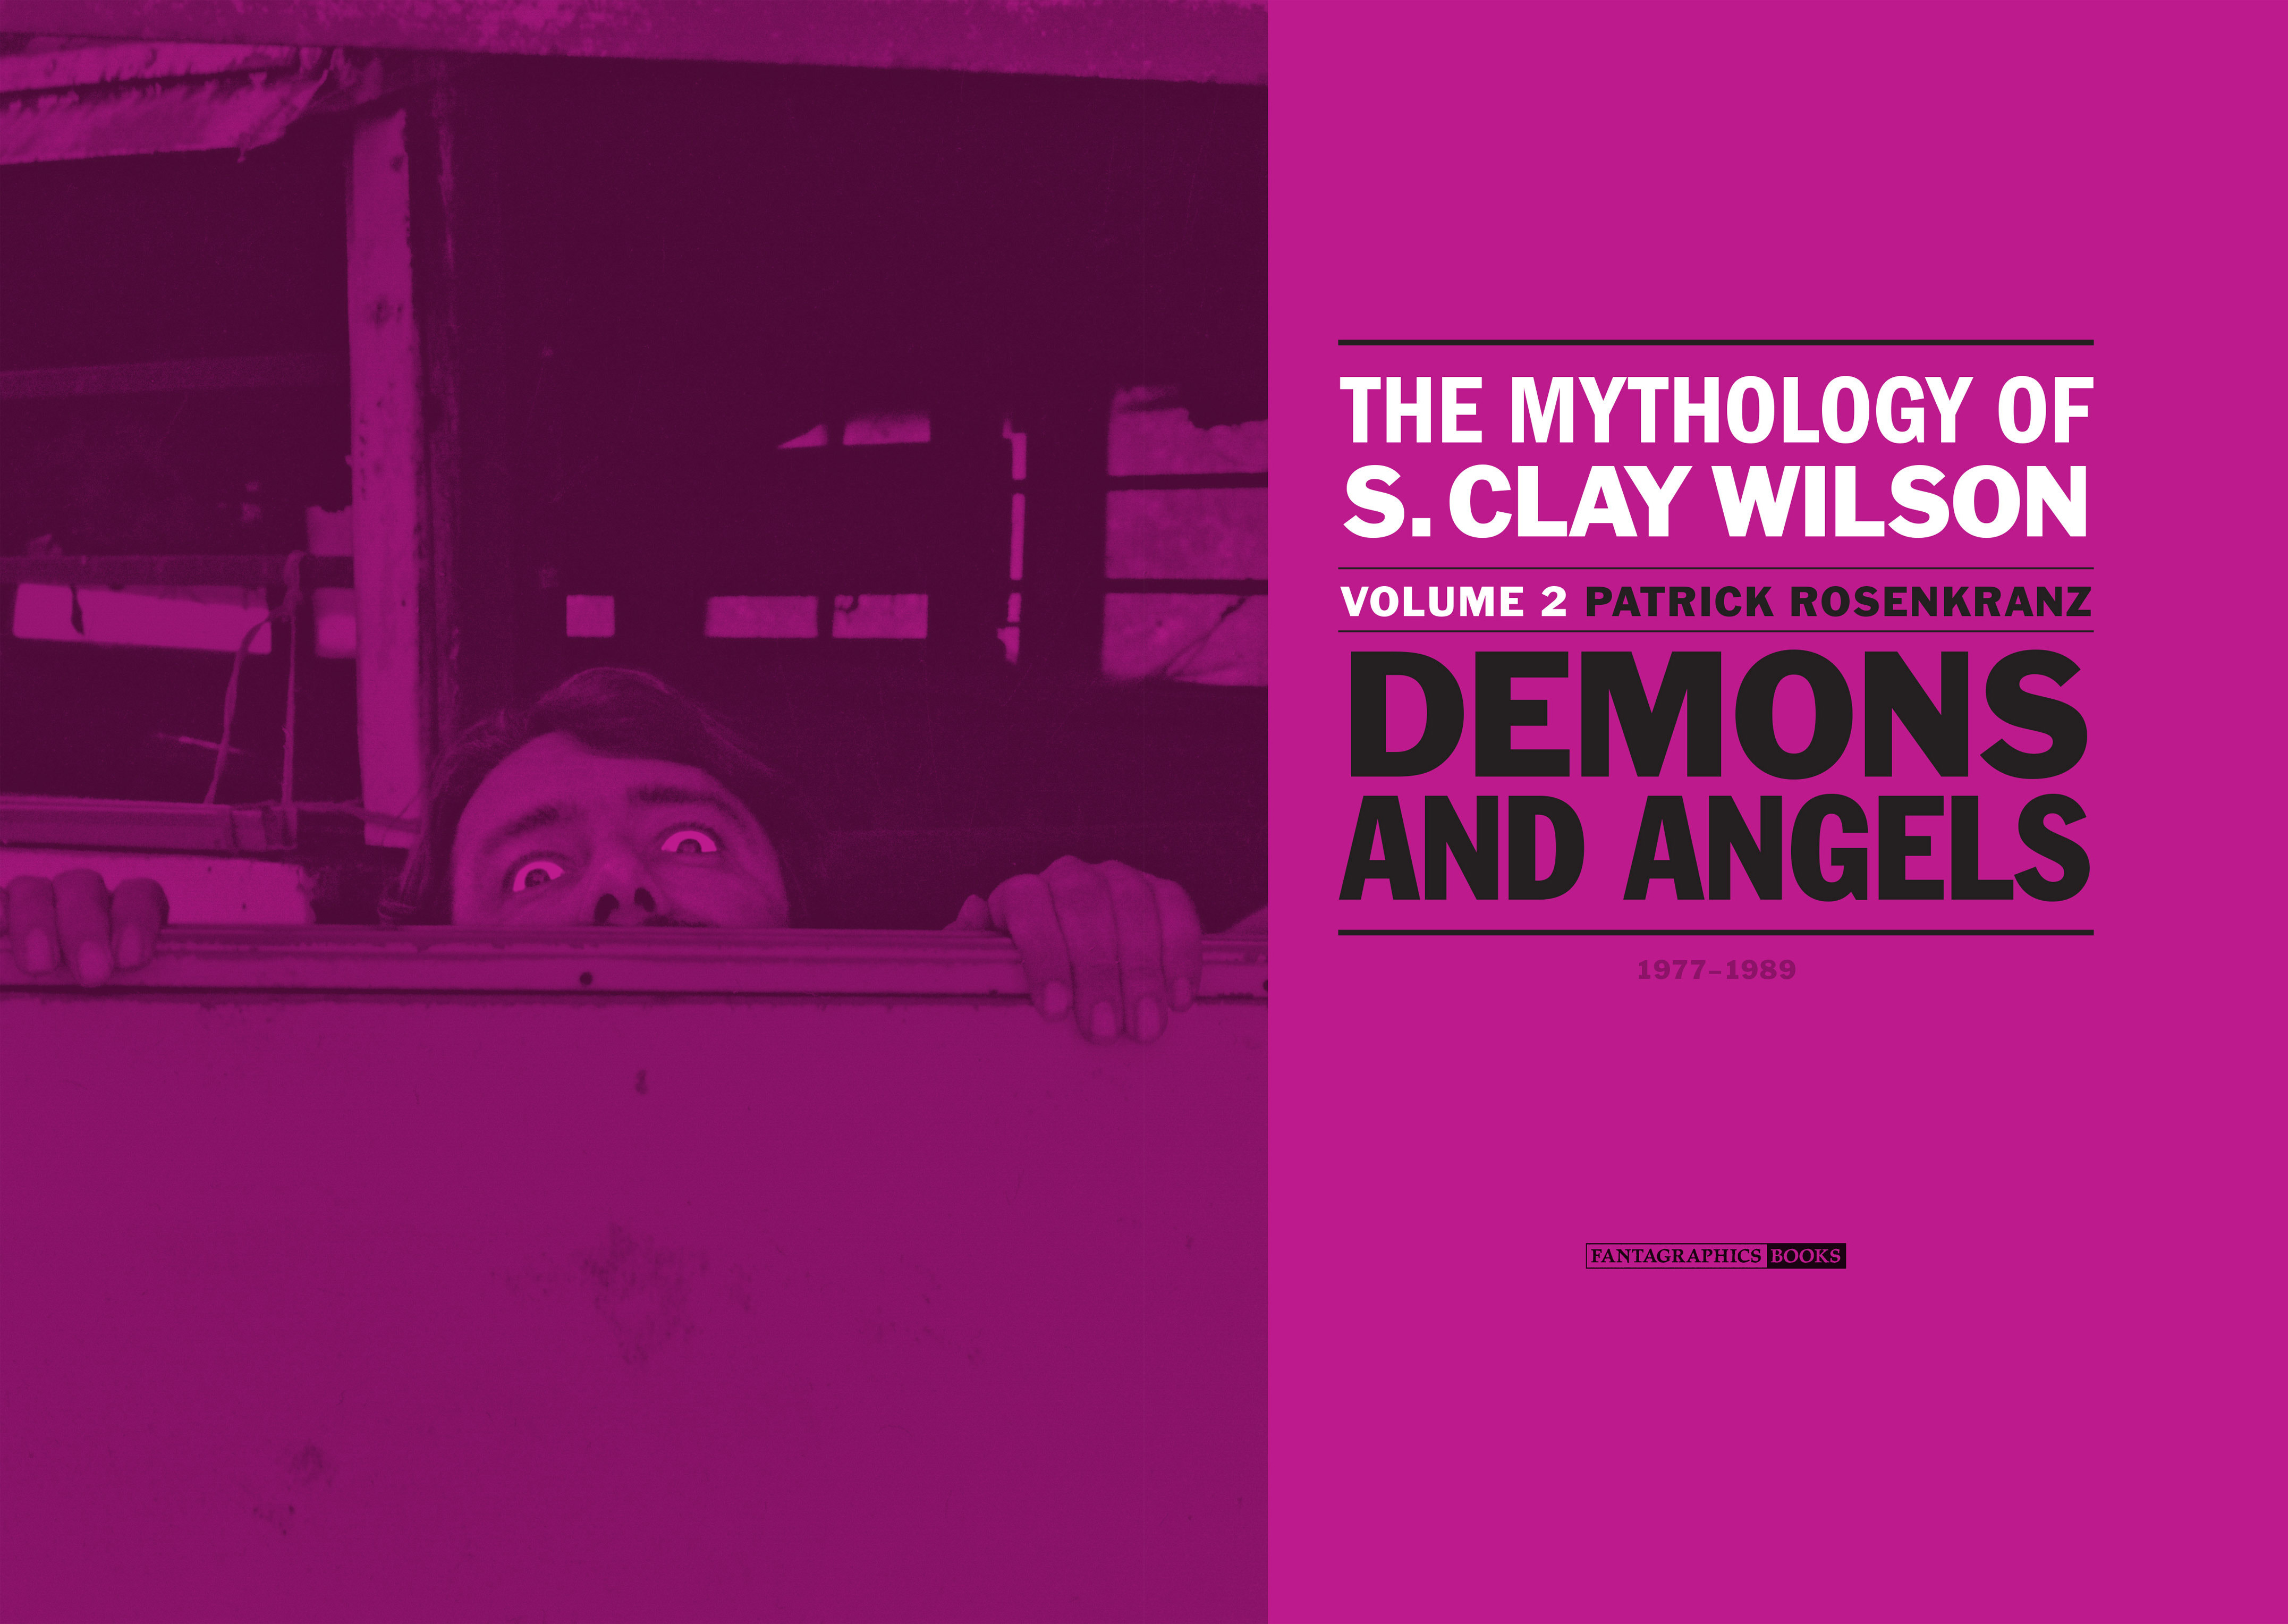 Read online The Mythology of S. Clay Wilson comic -  Issue # Demons and Angels (Part 1) - 3